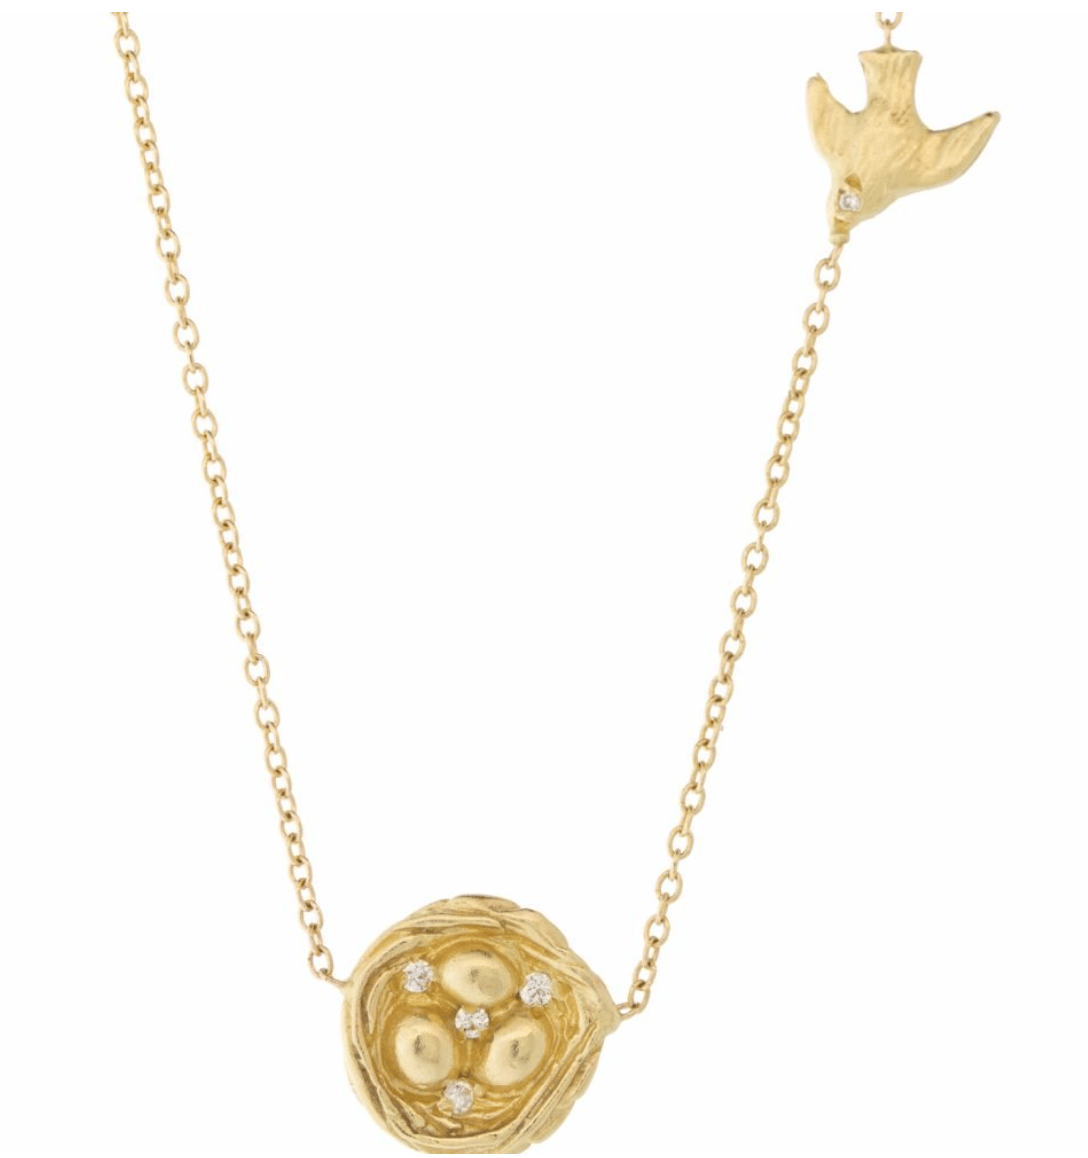 Image of 14 kt Gold and Diamonds Bird and Nest Necklace (Back in stock!)